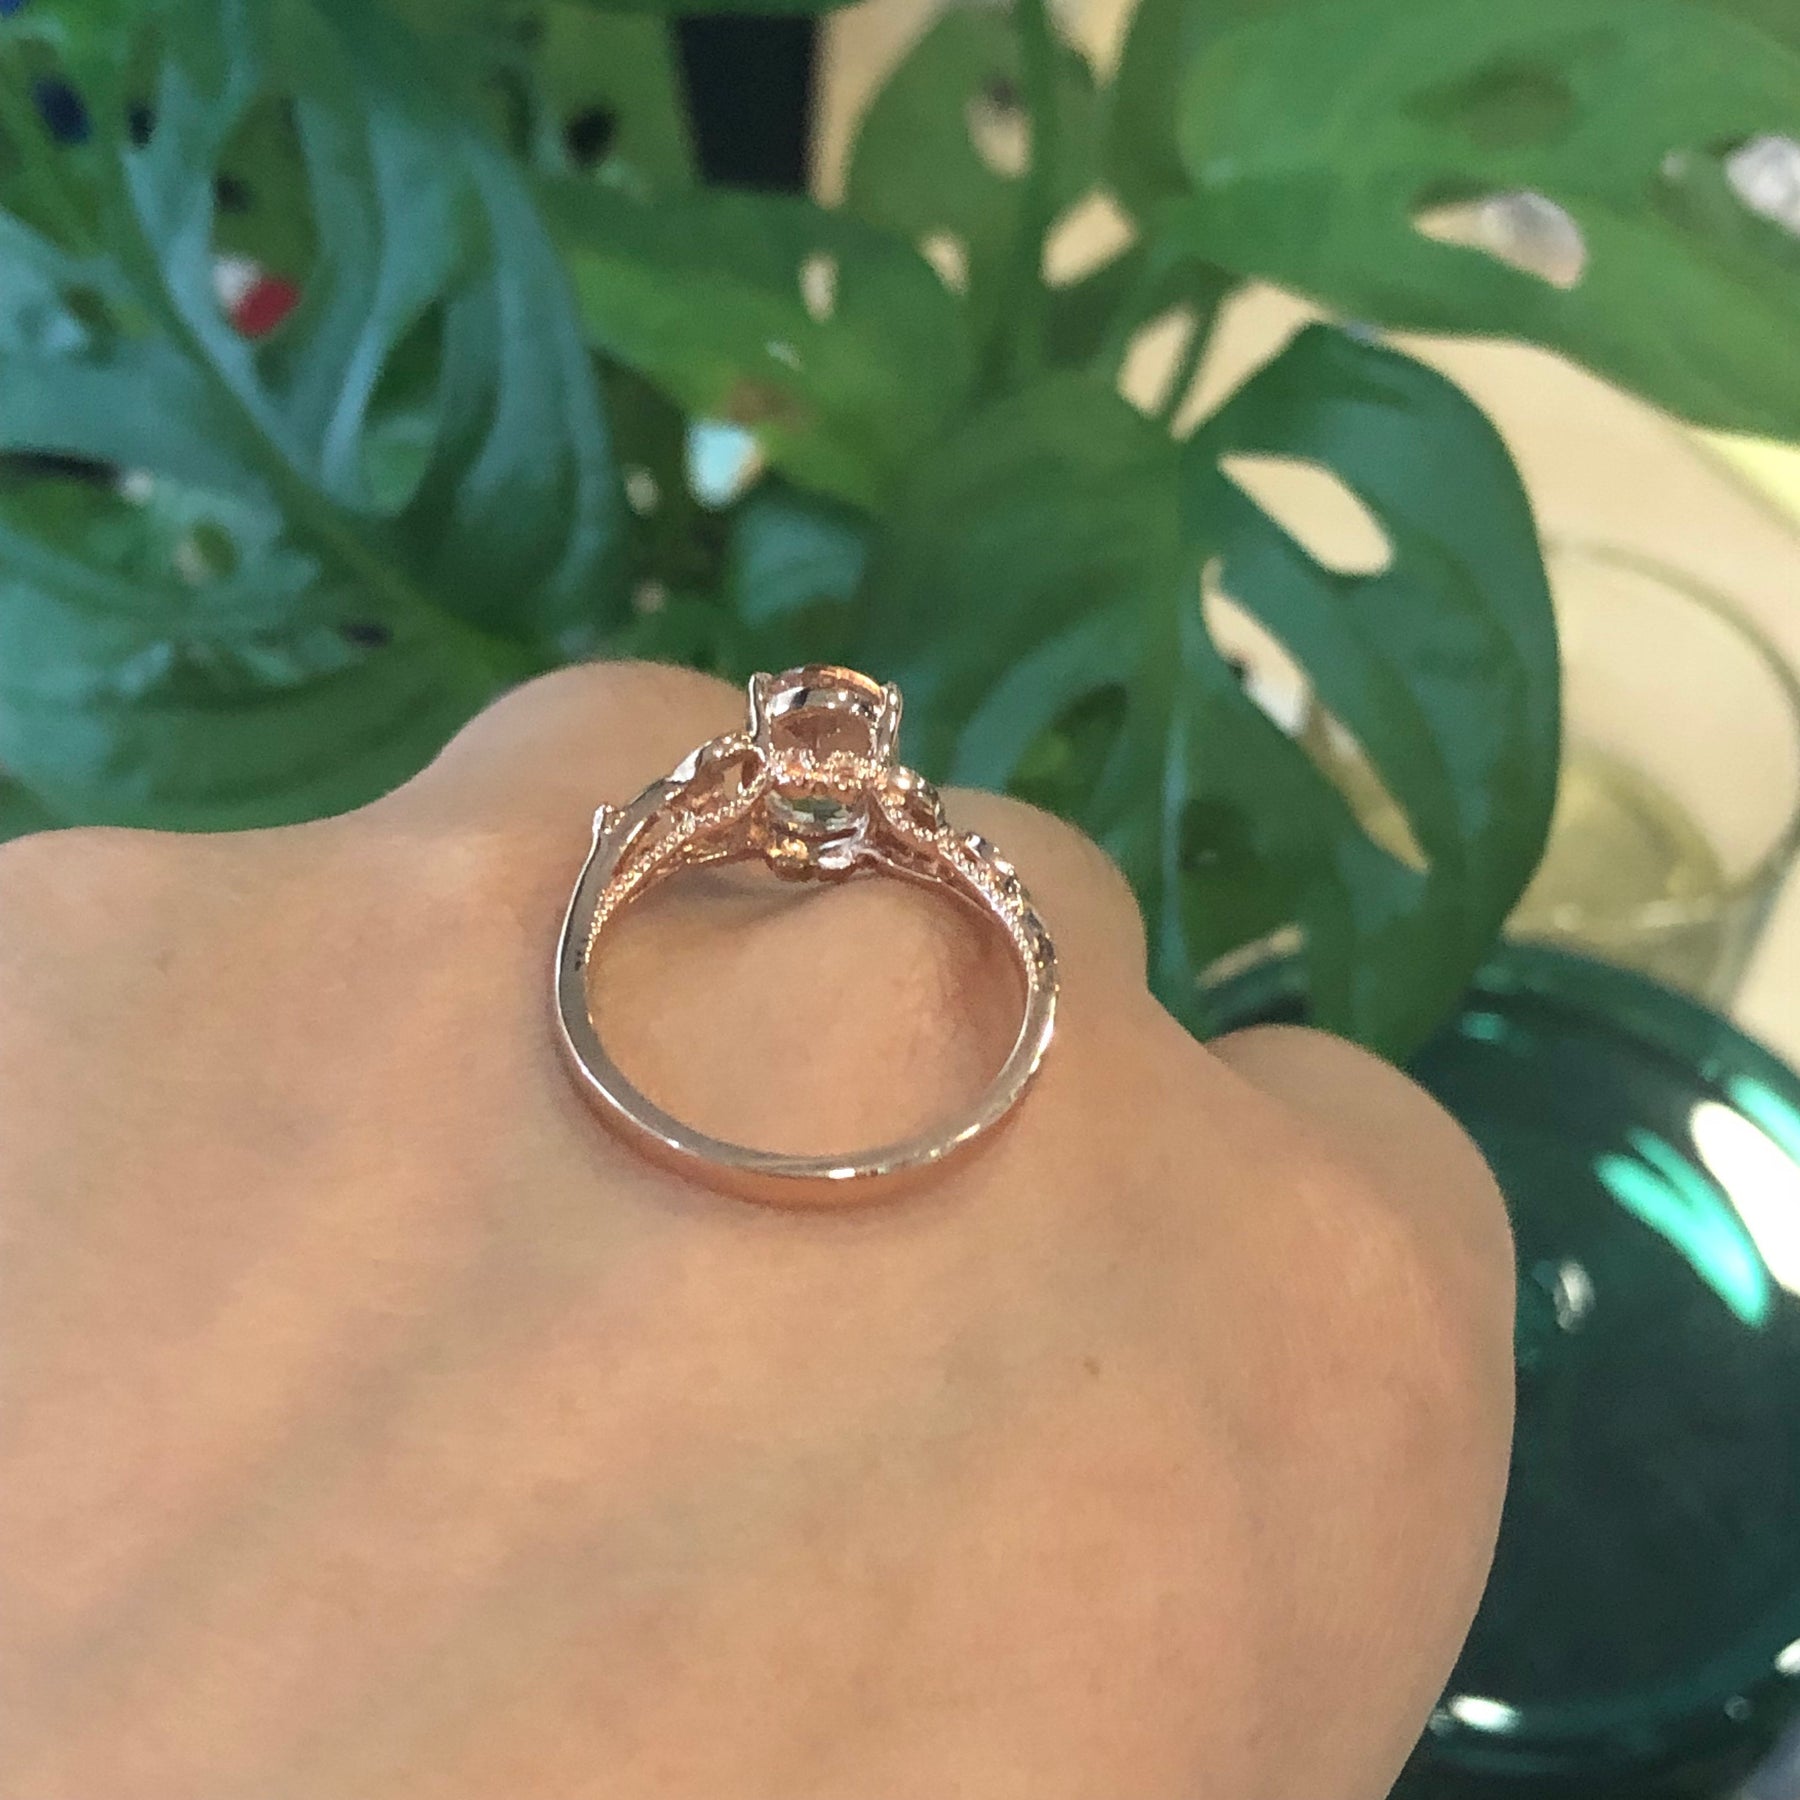 Reserved for GY- Oval Solitaire Morganite Engagement Ring 14K Rose Gold